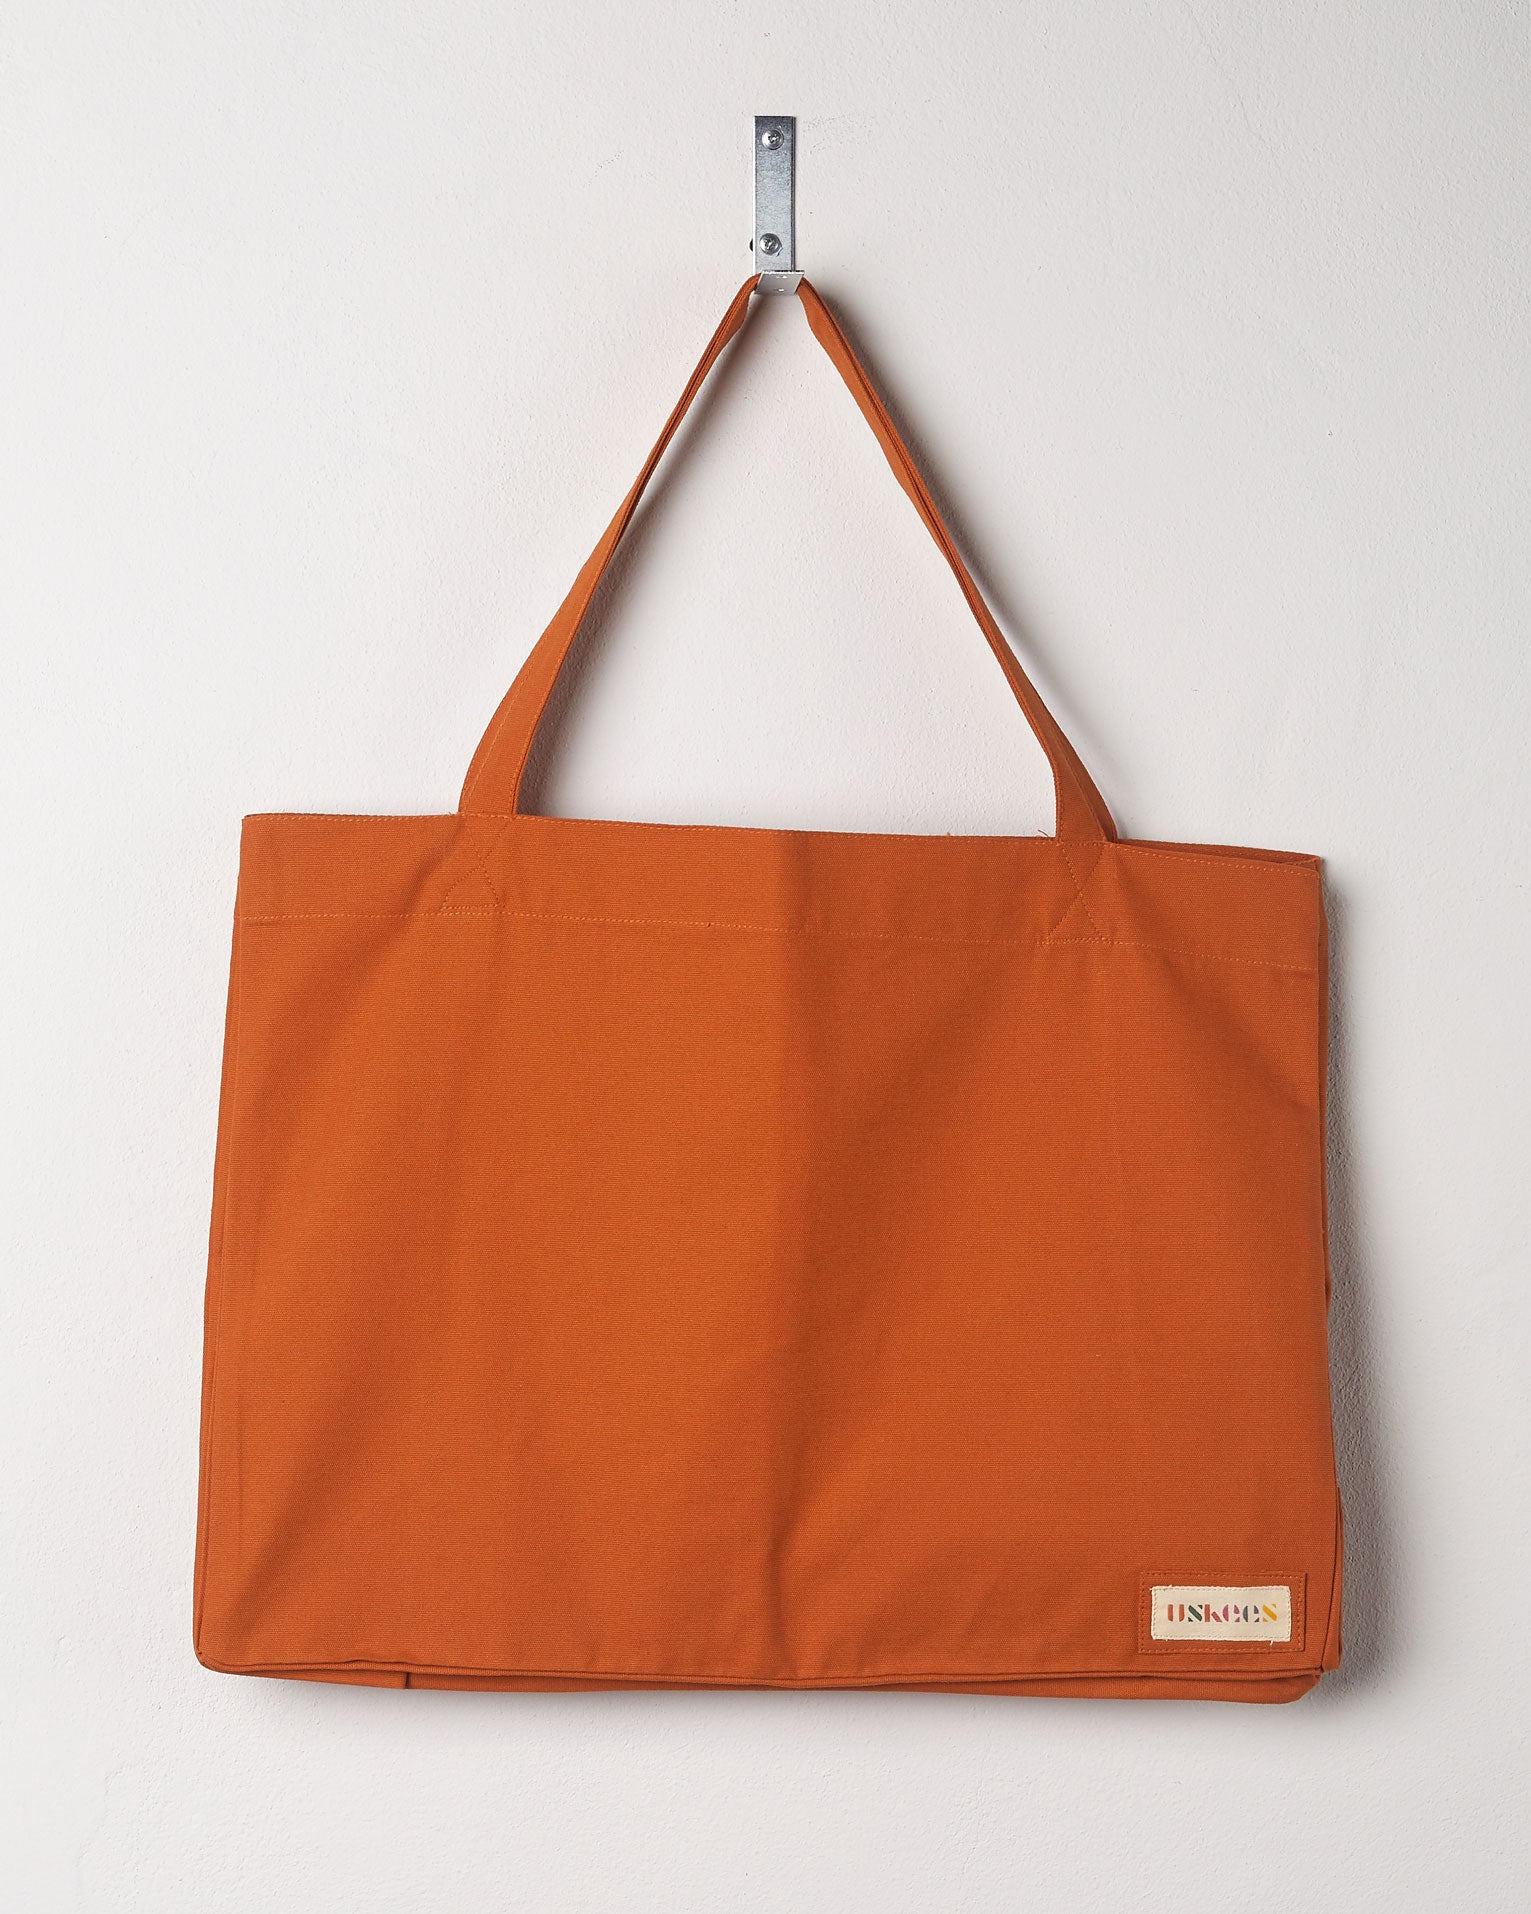 Full front hanging shot of Uskees #4001, large gold tote bag, showing double handles.